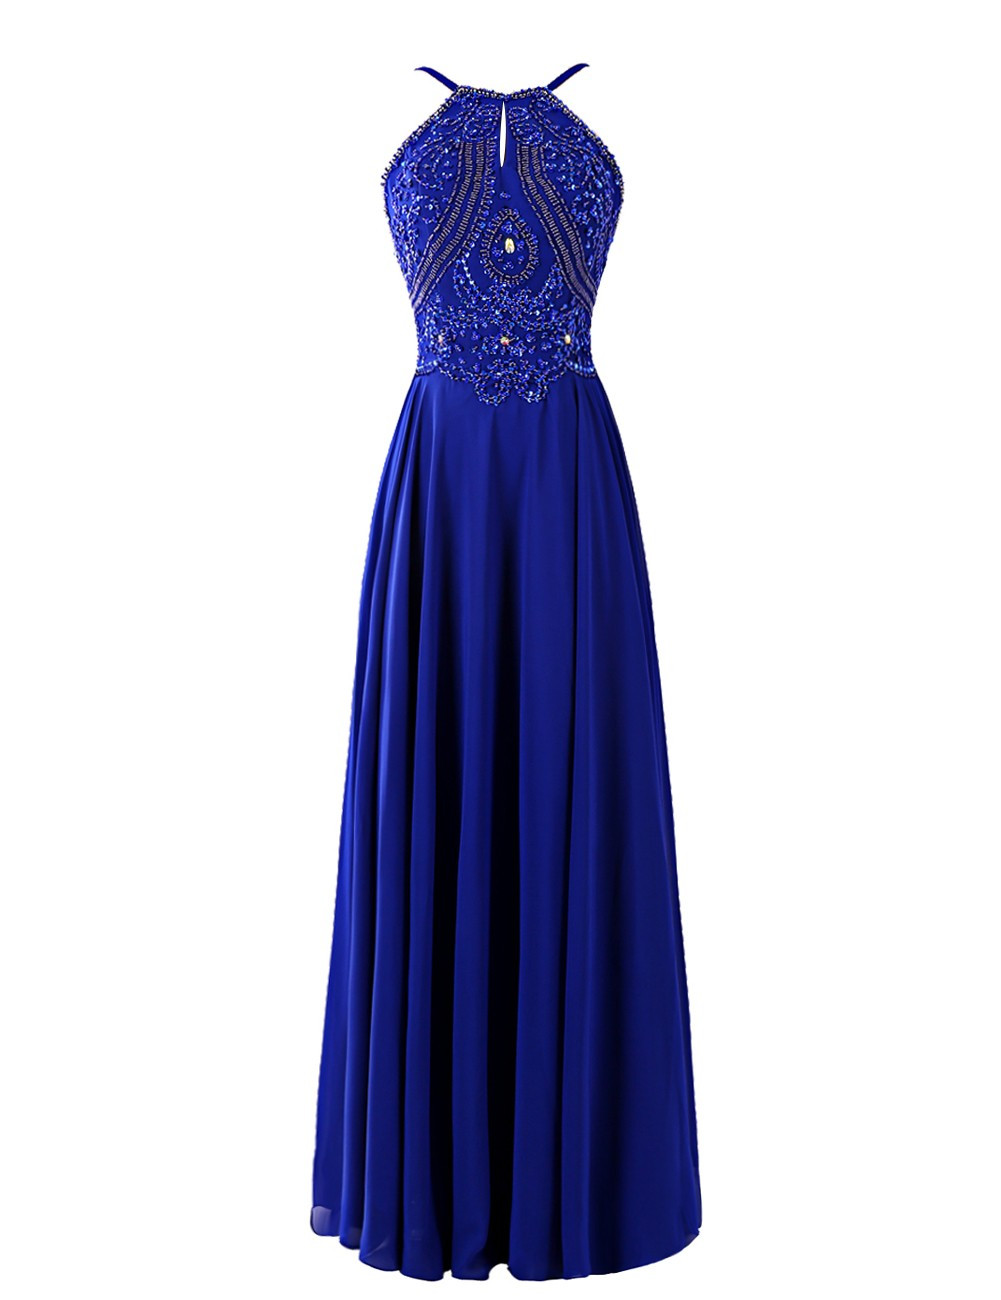 Royal Blue Prom Dress Formal Dresses Party Gown Pst0960 on Luulla